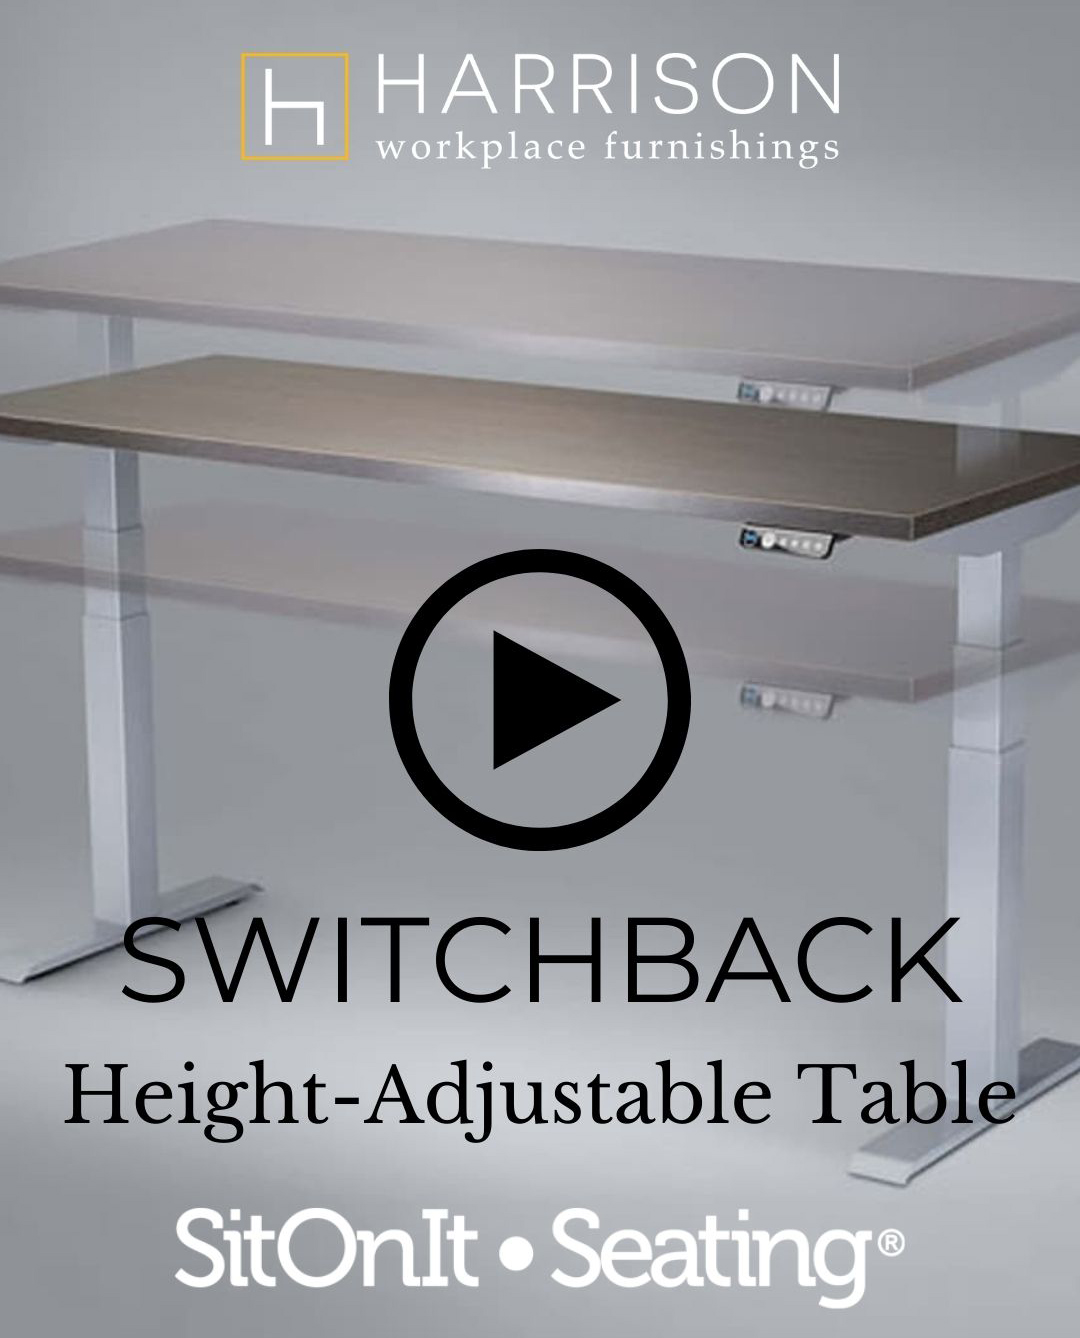 Switchback Height-Adjustable Table in Action